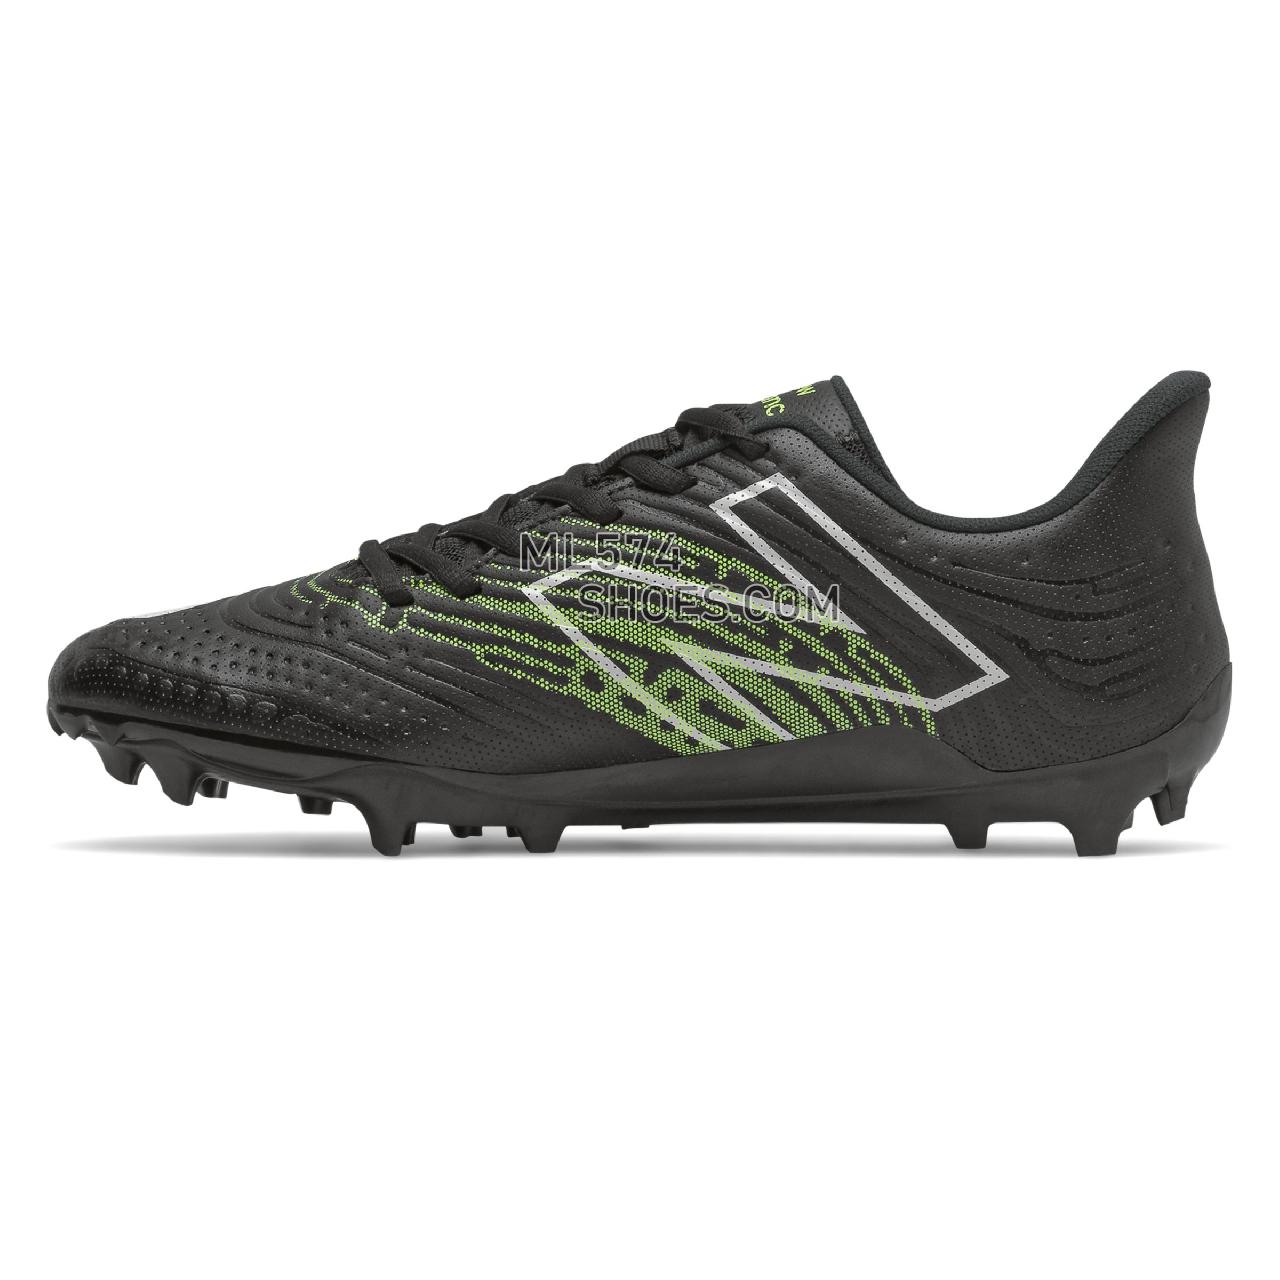 New Balance RushV3 Low - Men's Turf And Lacrosse Cleats - Black with White - RUSHLB3